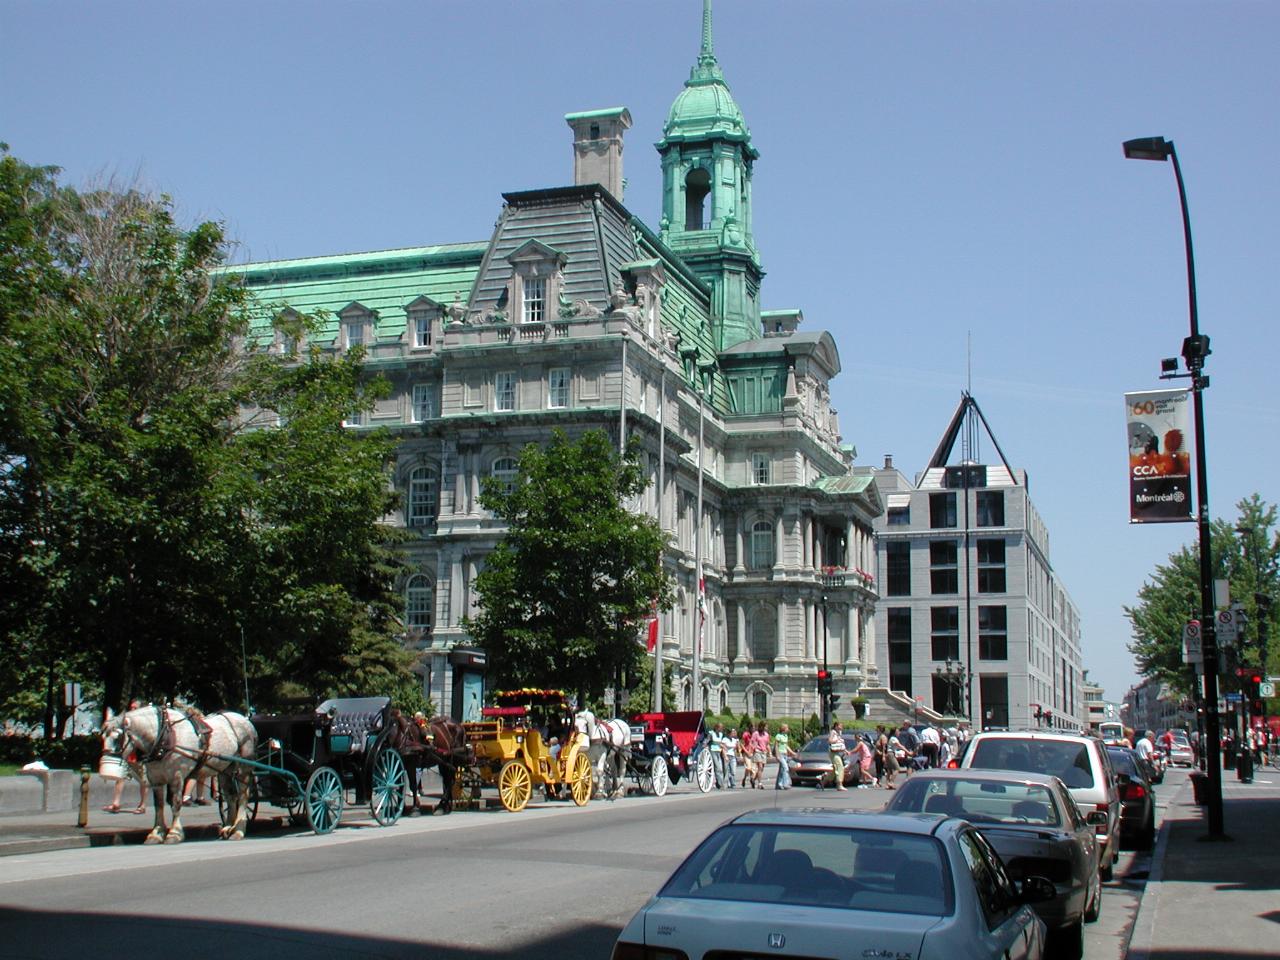 More horse drwan tours in front of Montreal City Hall